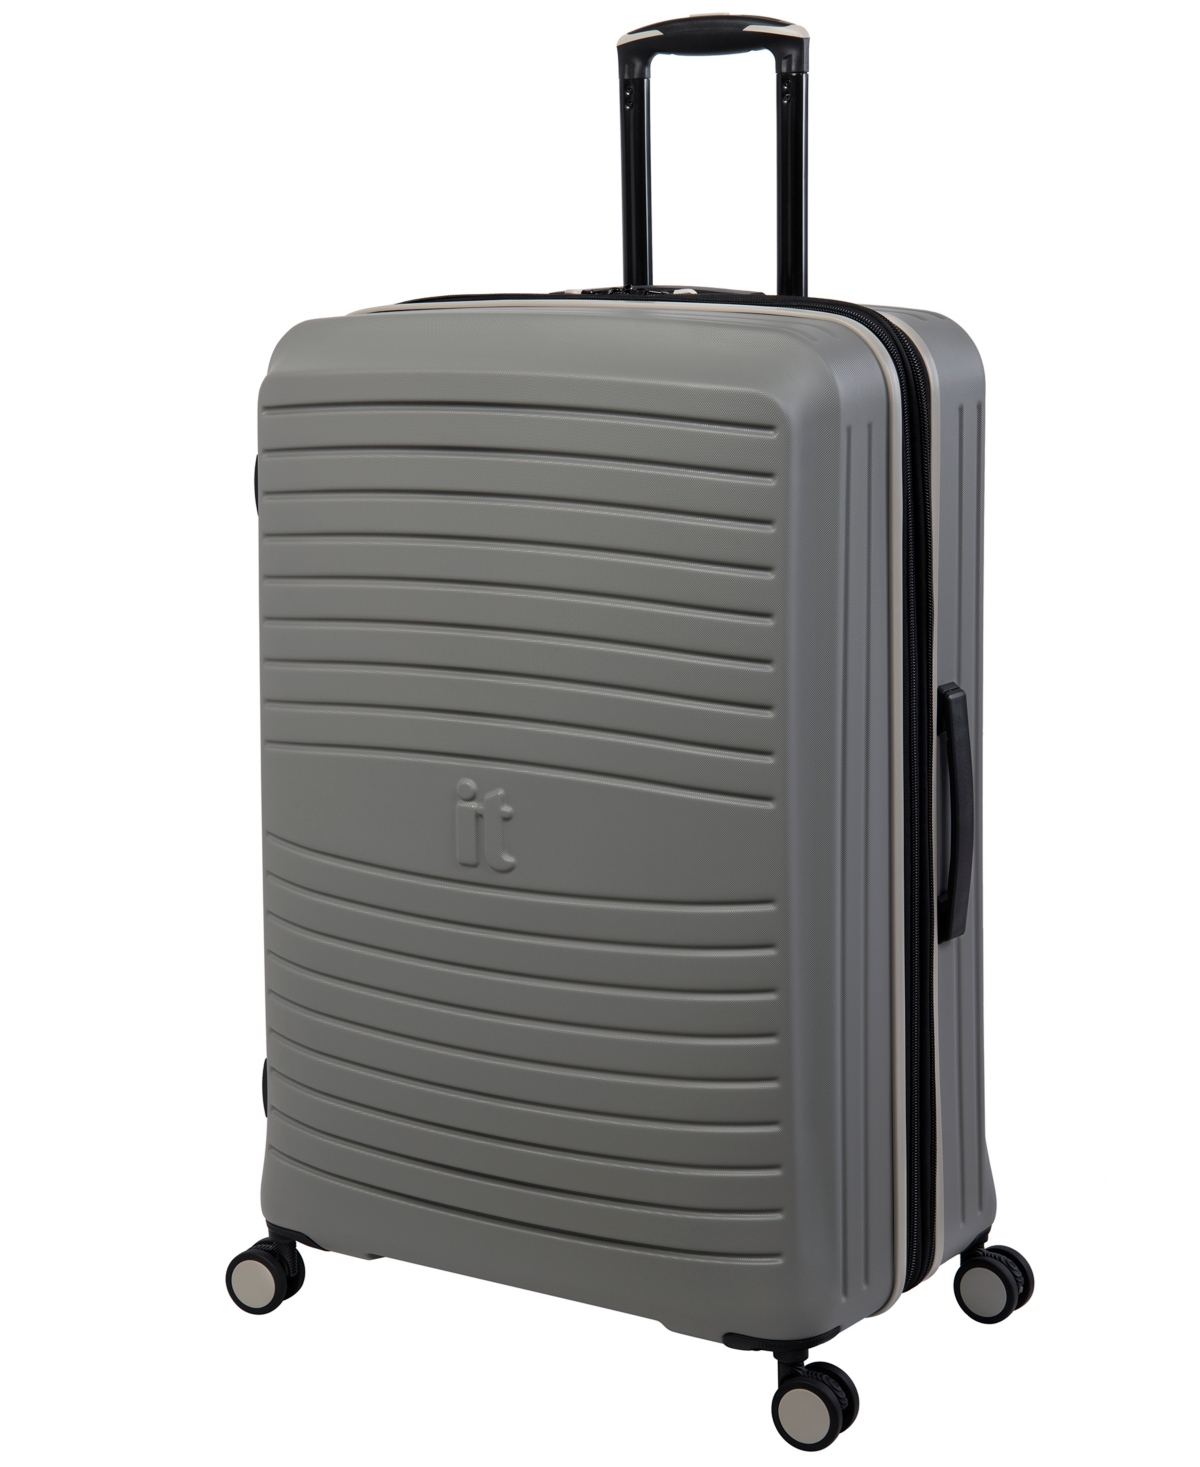 25" Hardside 8-Wheel Expandable Spinner Luggage - Coffee Bean